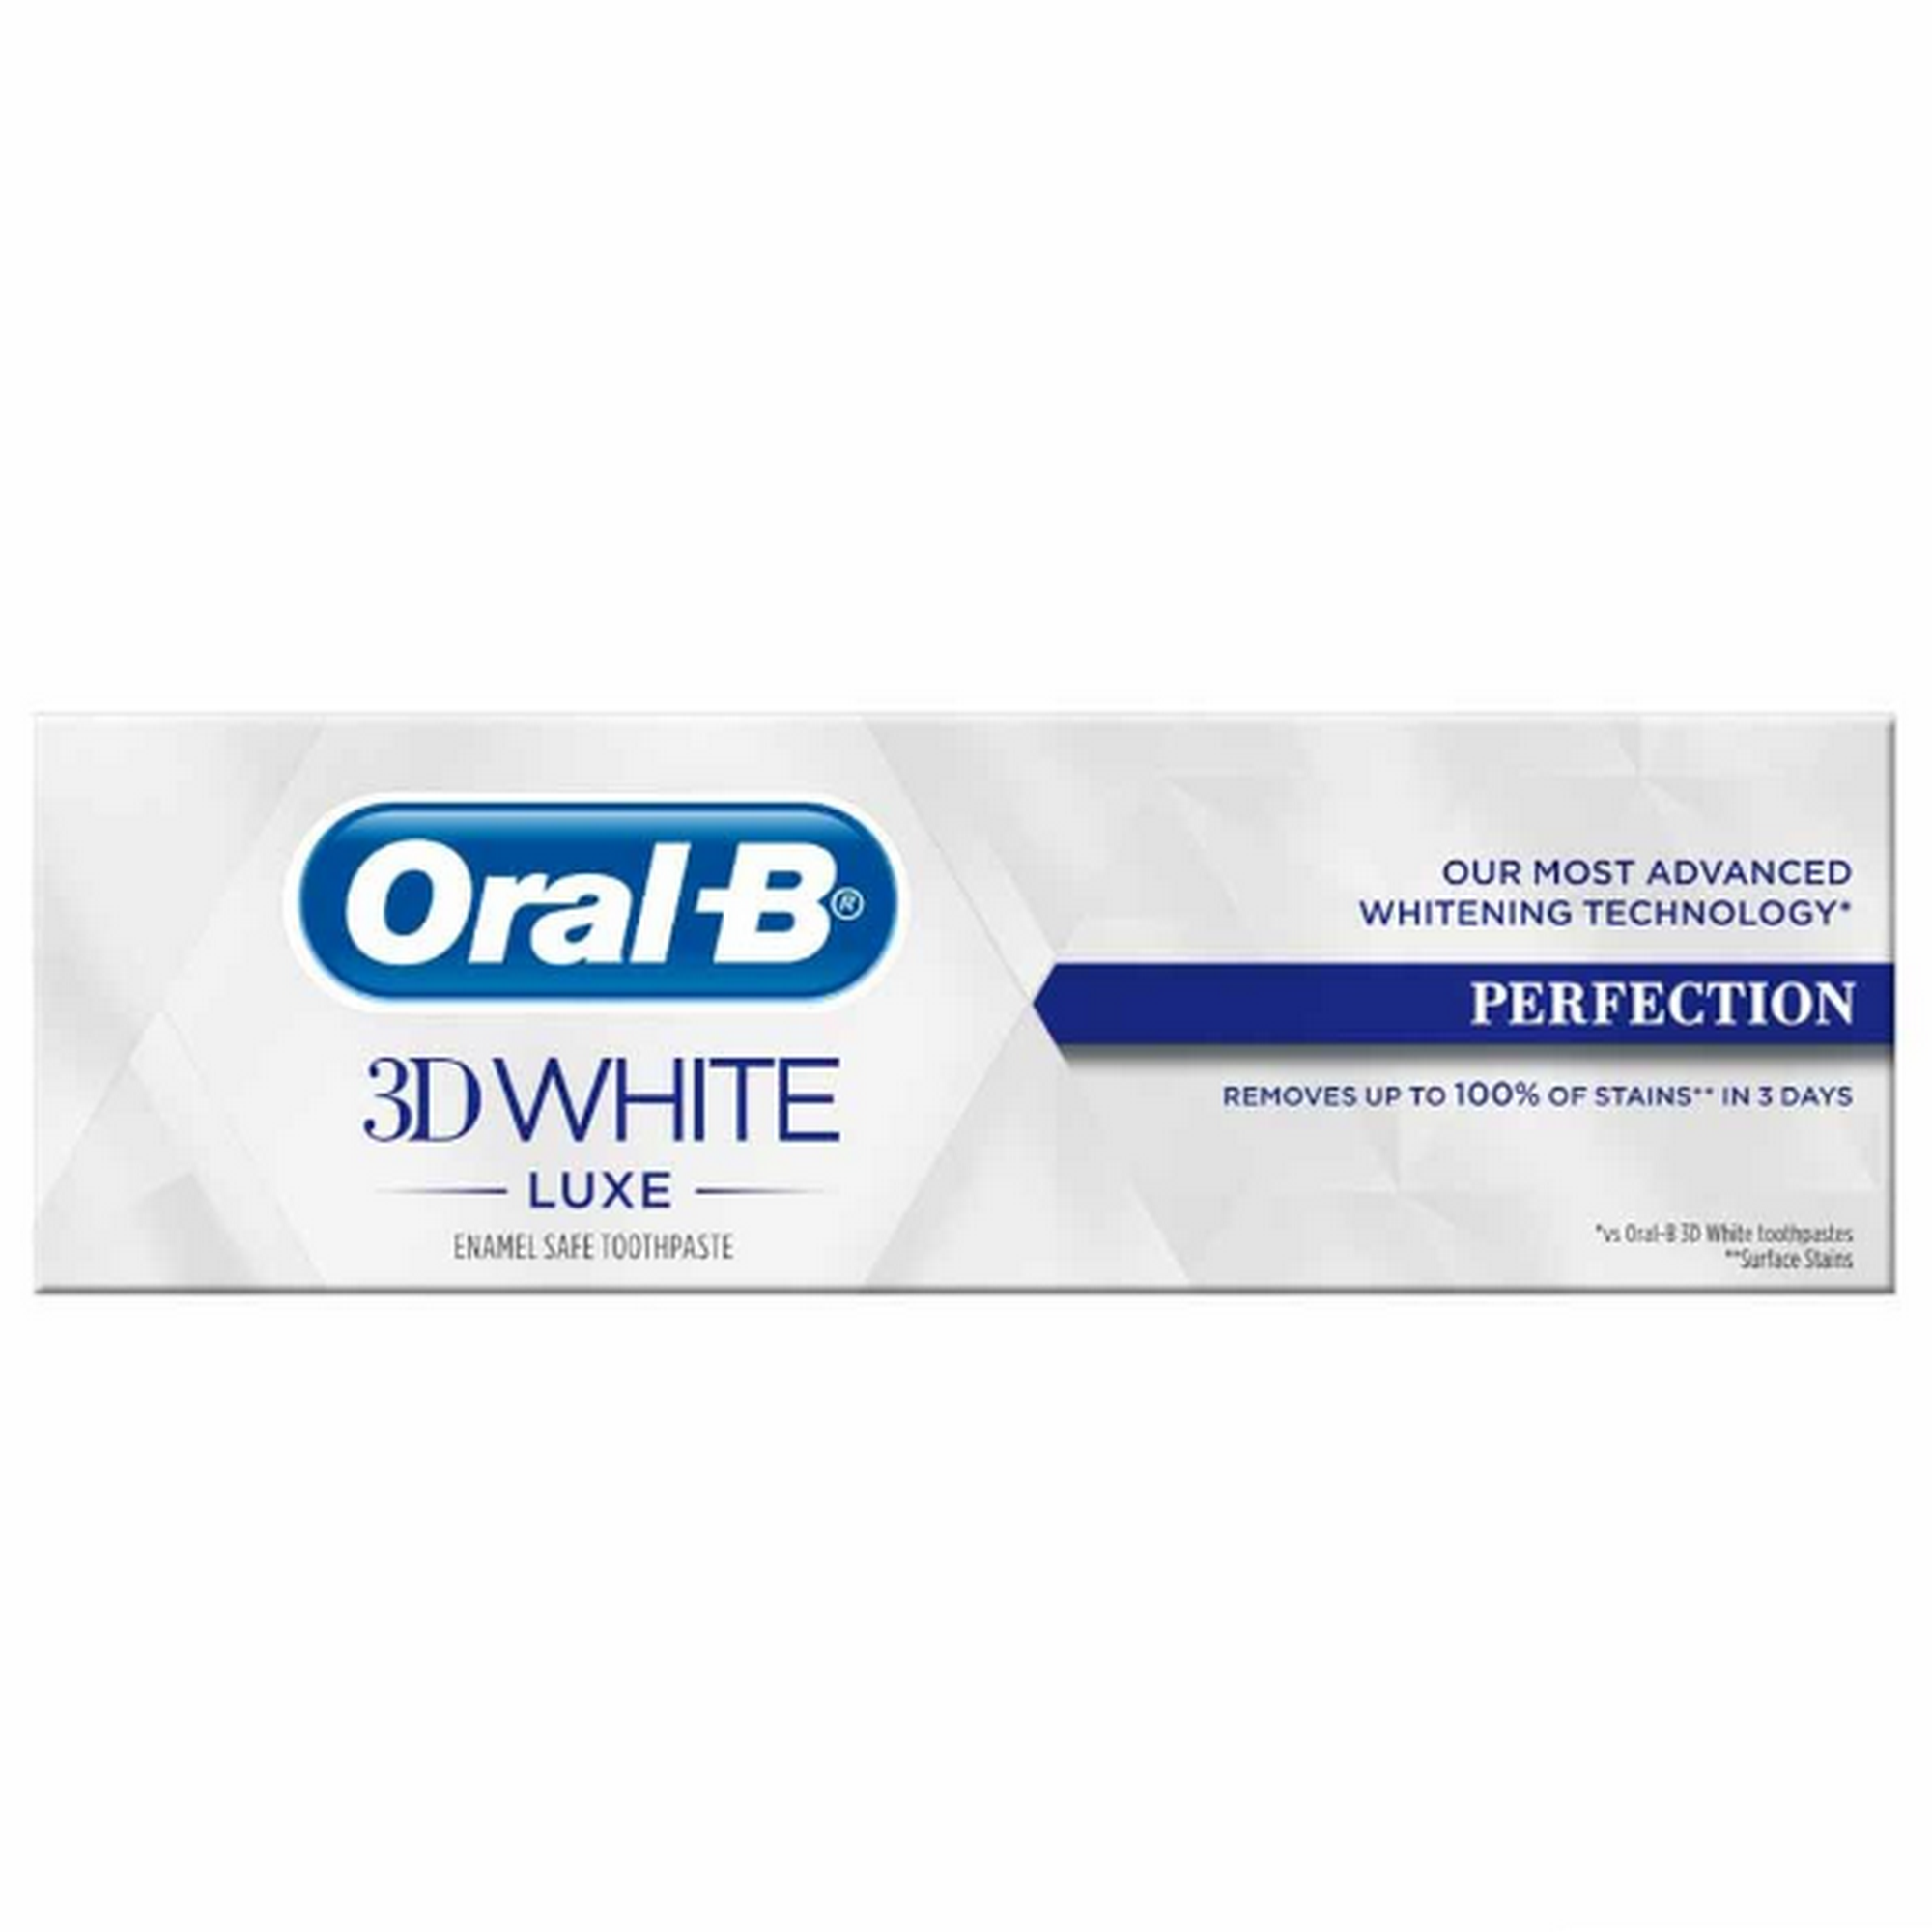 Oral B 3D White Luxe Toothpaste 75Ml Perfection